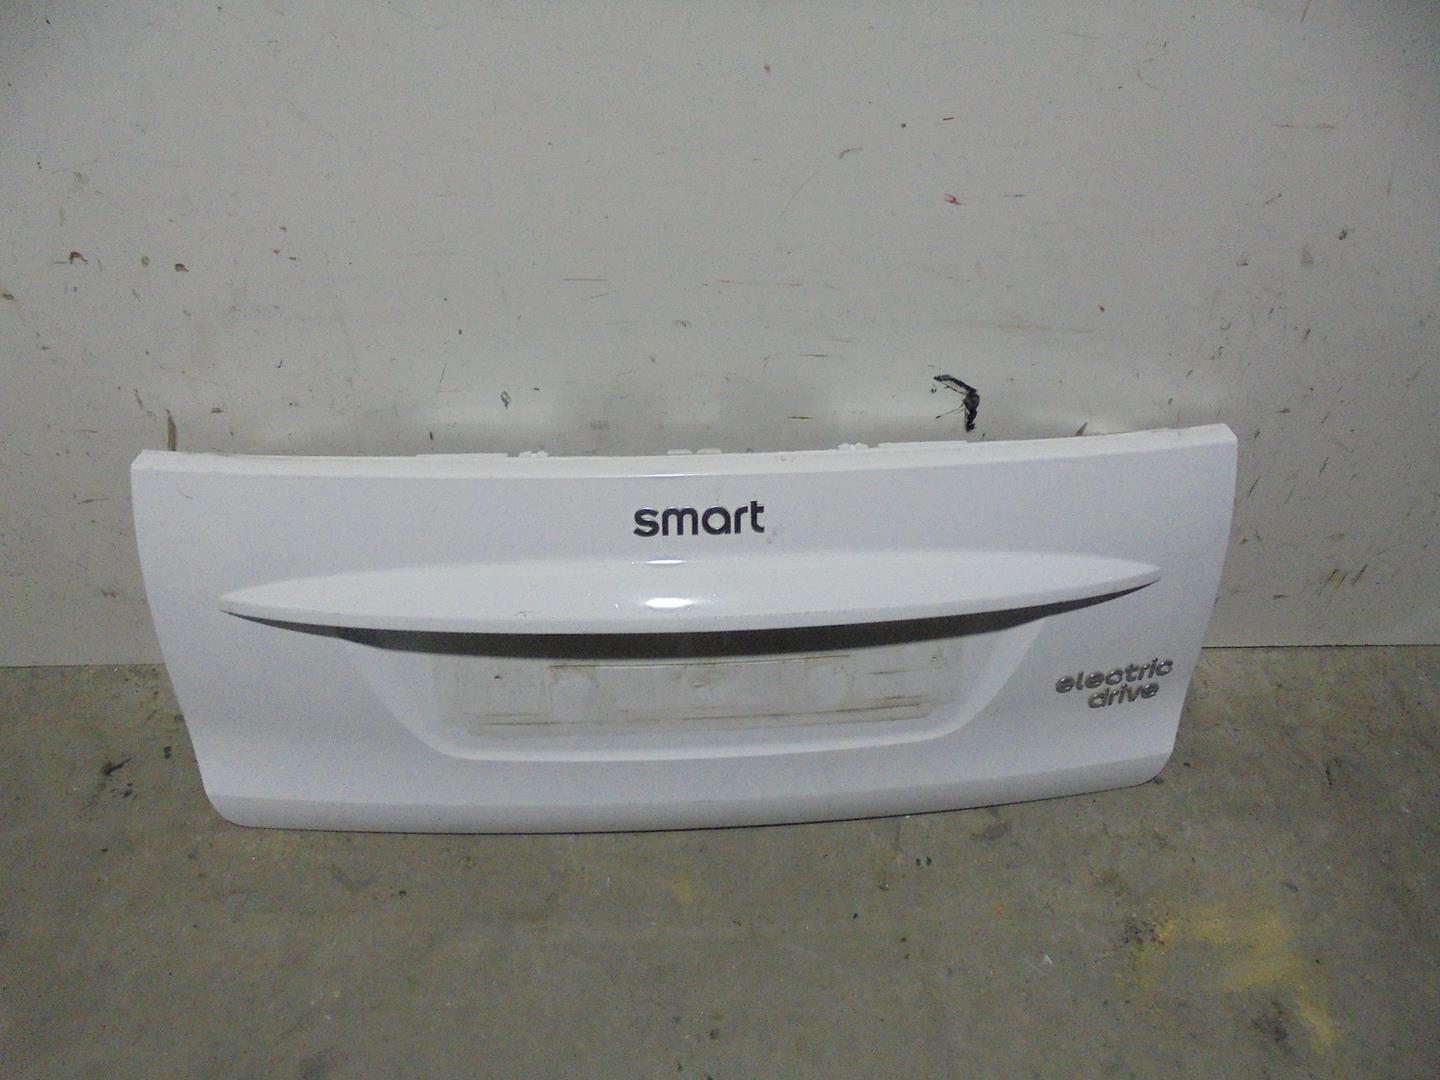 SMART Fortwo 2 generation (2007-2015) Bootlid Rear Boot A4517570006CA6L, BLANCO, 2PUERTAS 24549694